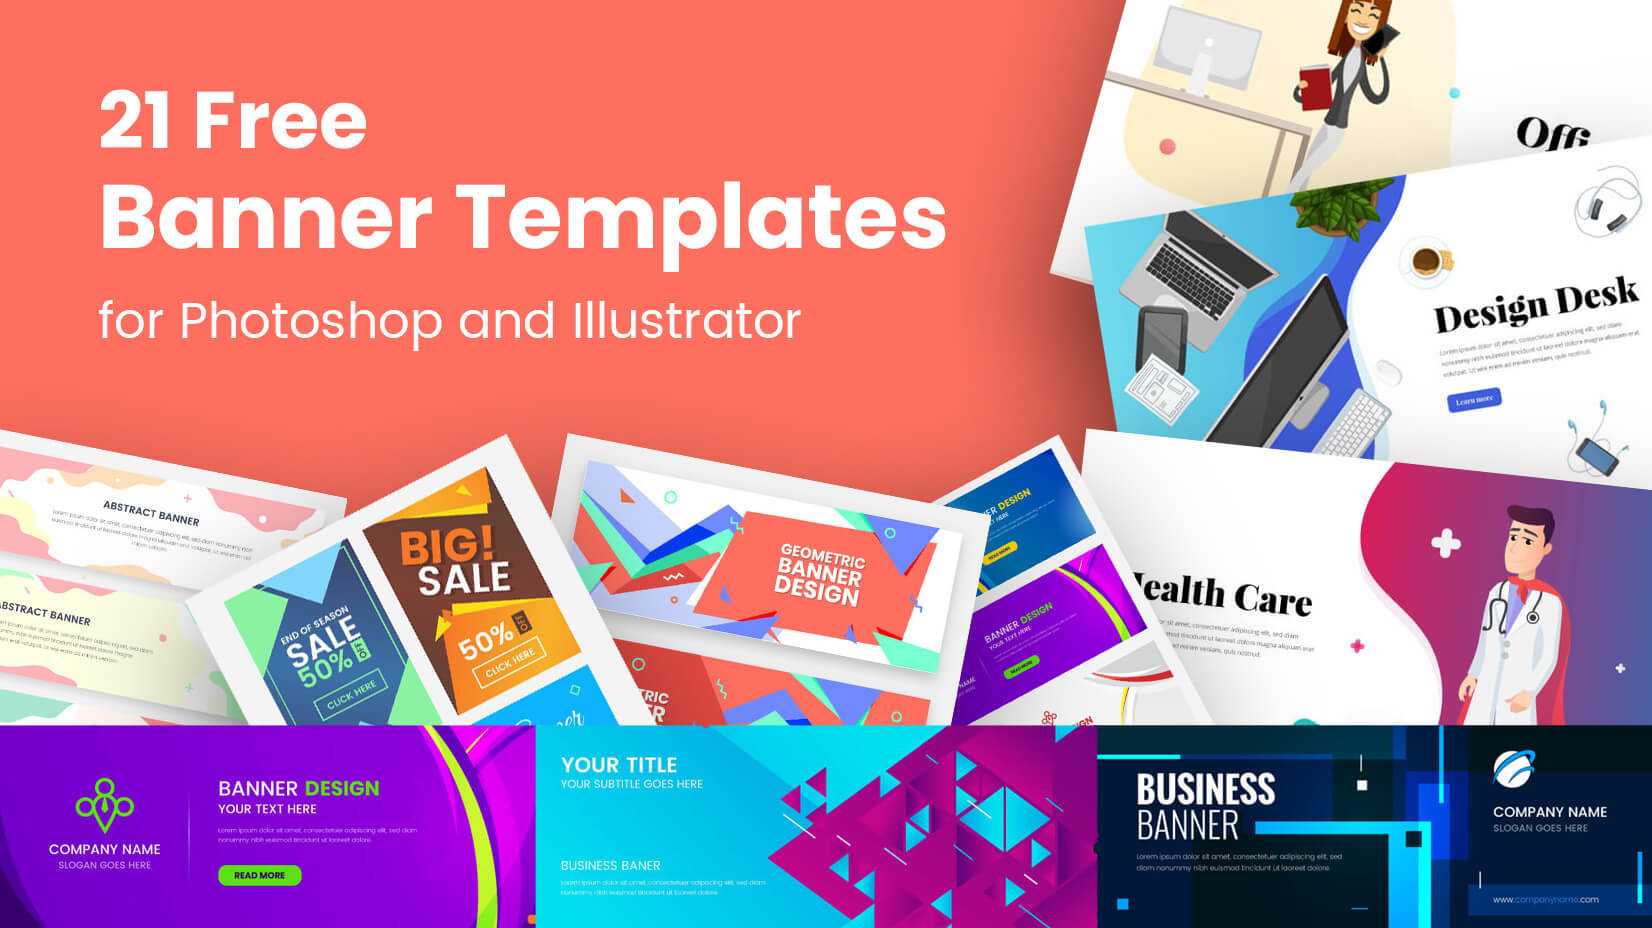 21 Free Banner Templates For Photoshop And Illustrator Intended For Free Online Banner Templates